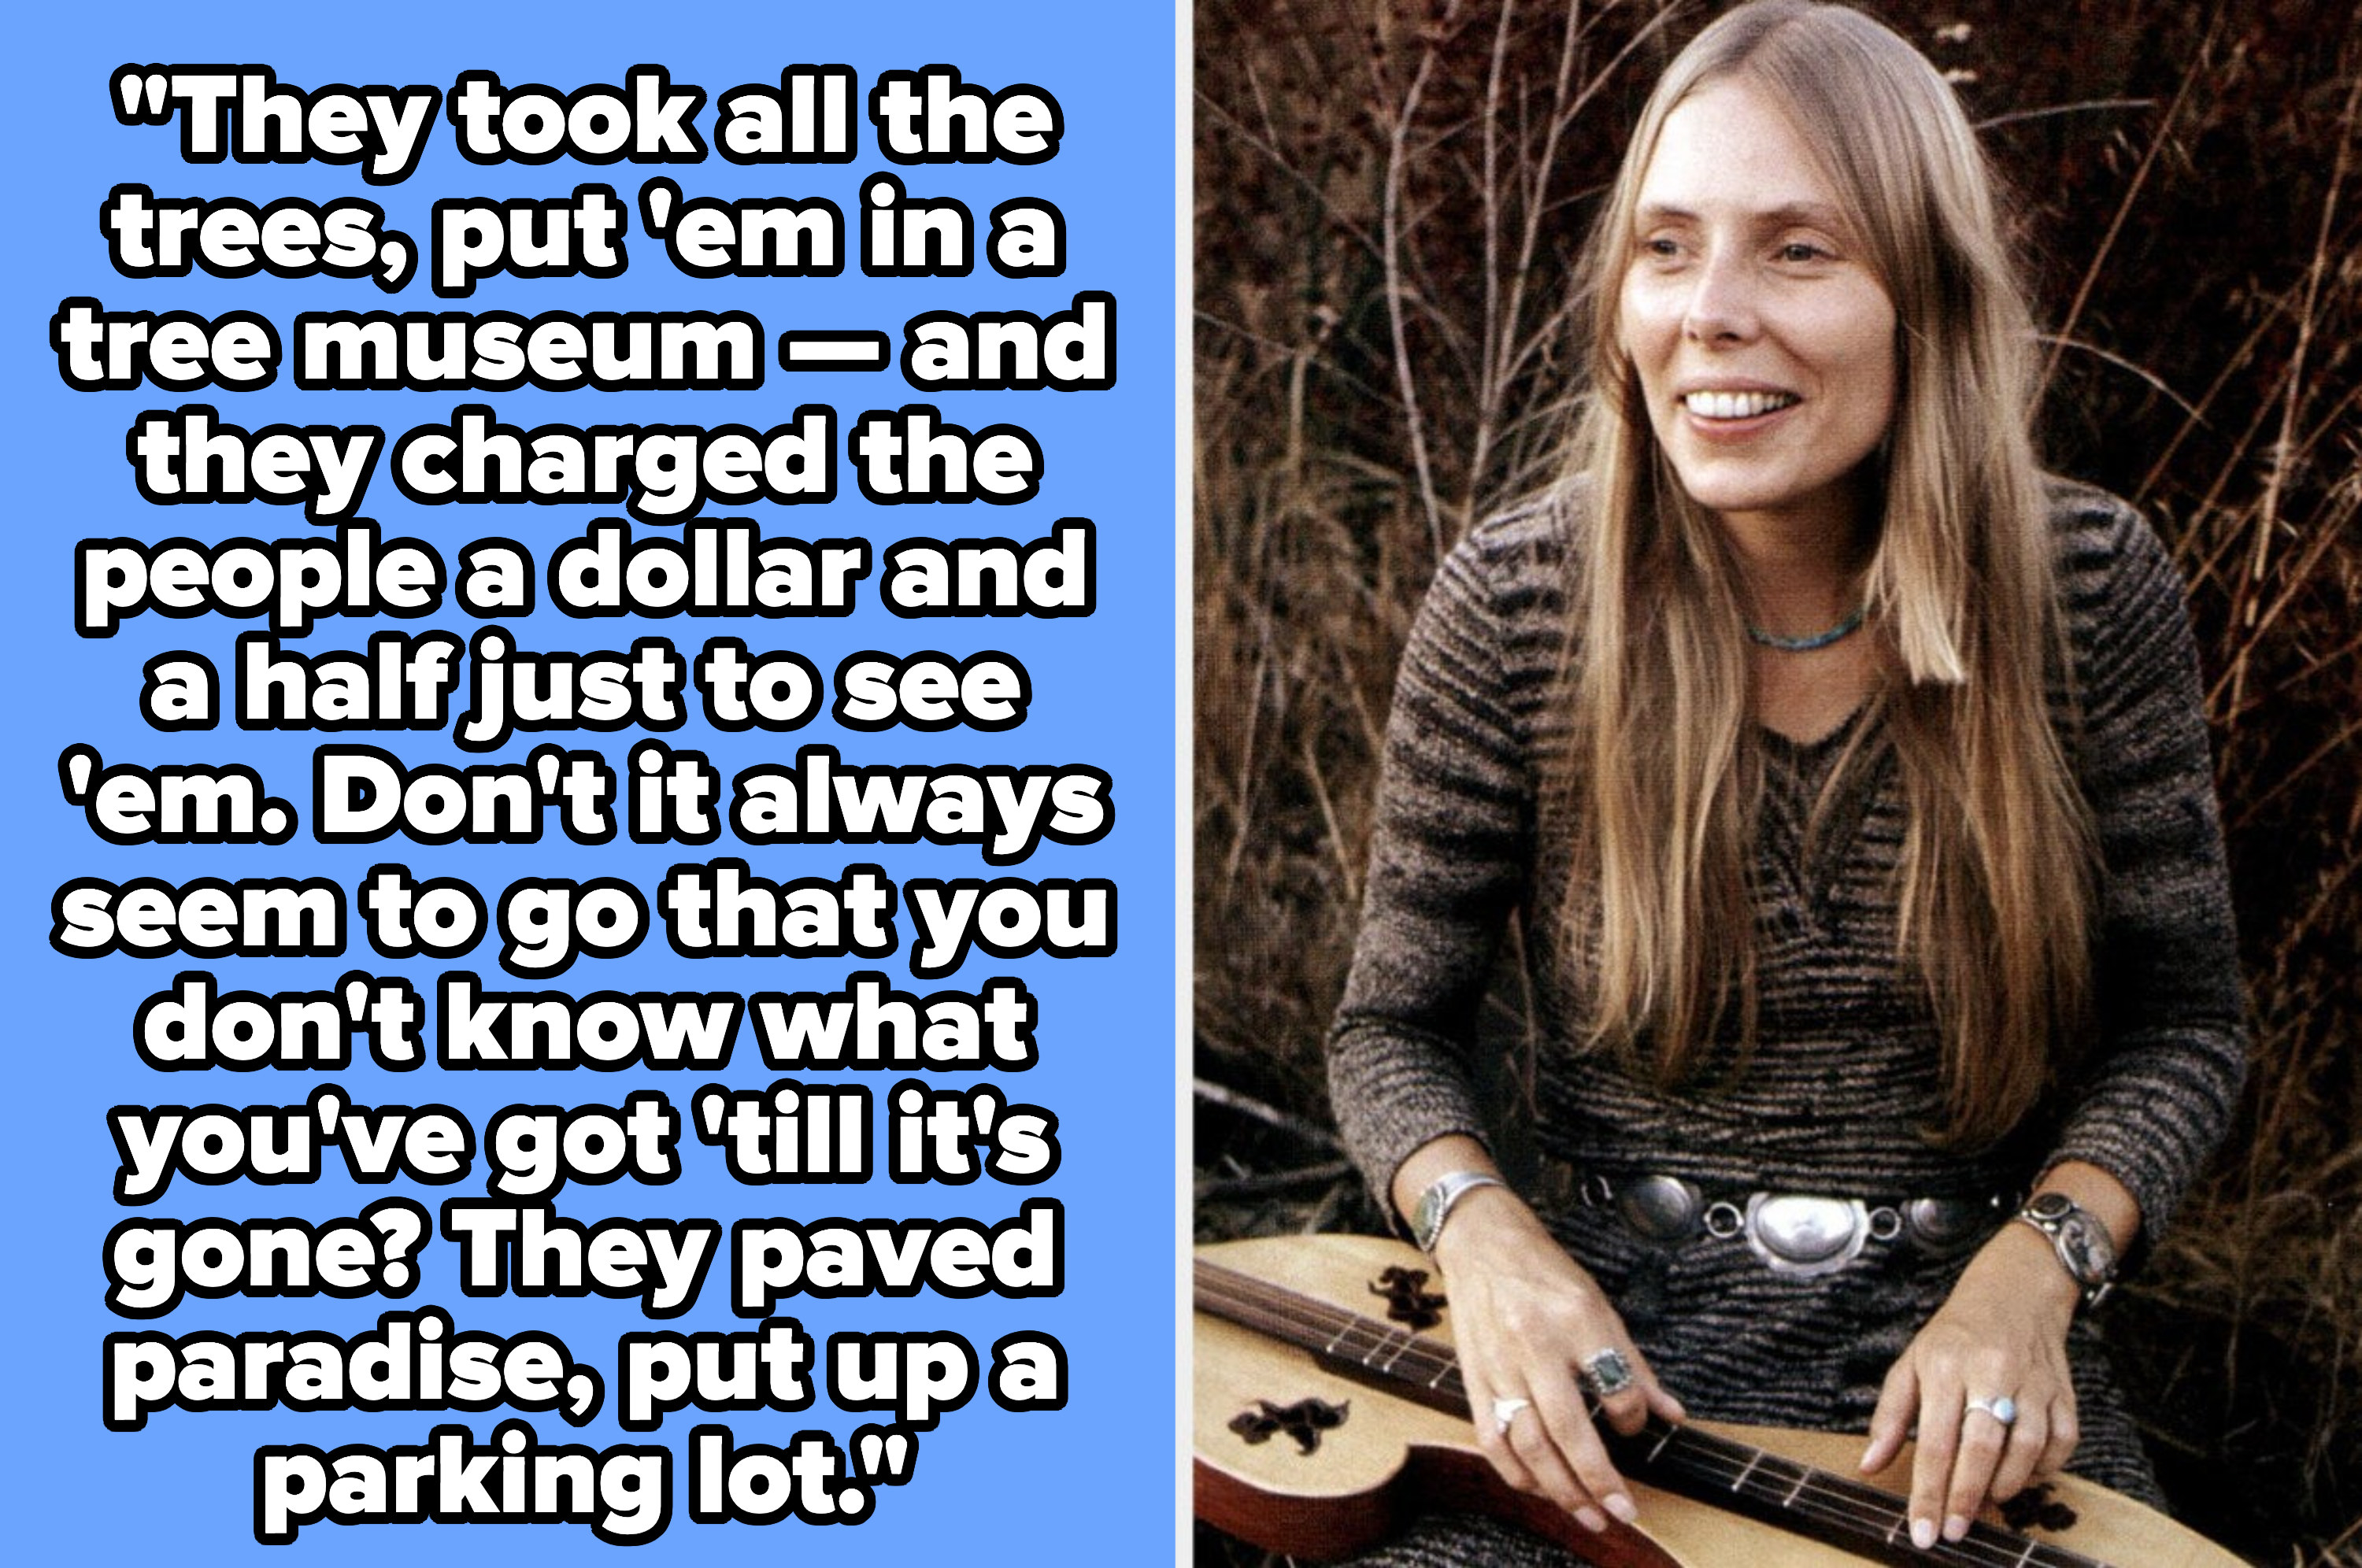 Joni Mitchell lyrics: &quot;They took all the trees, put &#x27;em in a tree museum — and they charged the people a dollar and a half just to see &#x27;em. Don&#x27;t it always seem to go that you don&#x27;t know what you&#x27;ve got &#x27;till it&#x27;s gone?&quot;